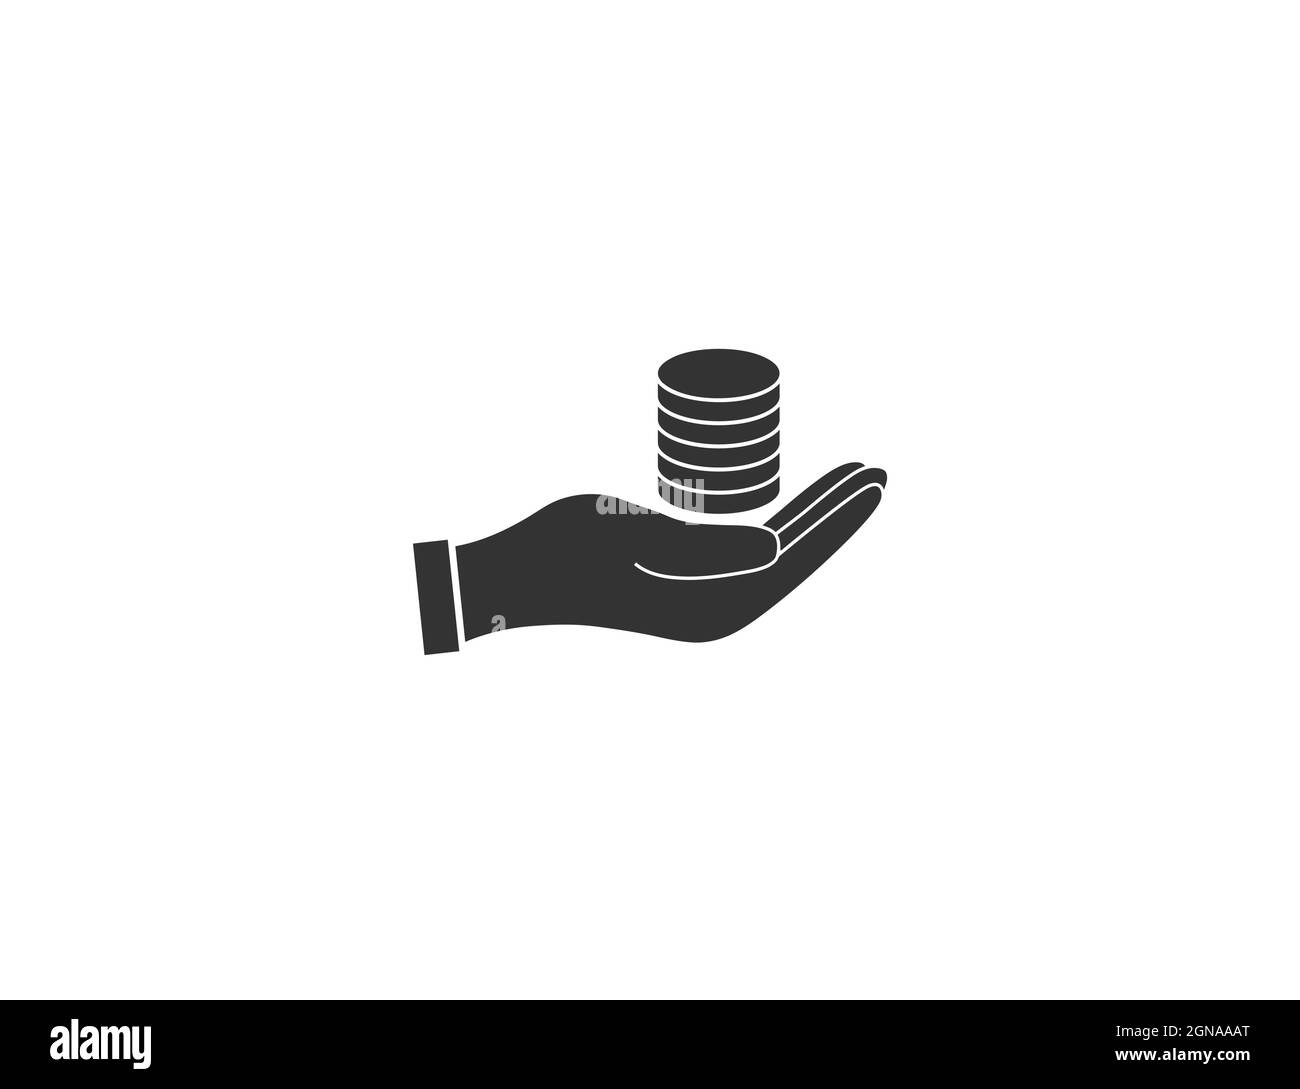 Hand, coins icon. Money in hand. Vector illustration. Flat design. Stock Vector